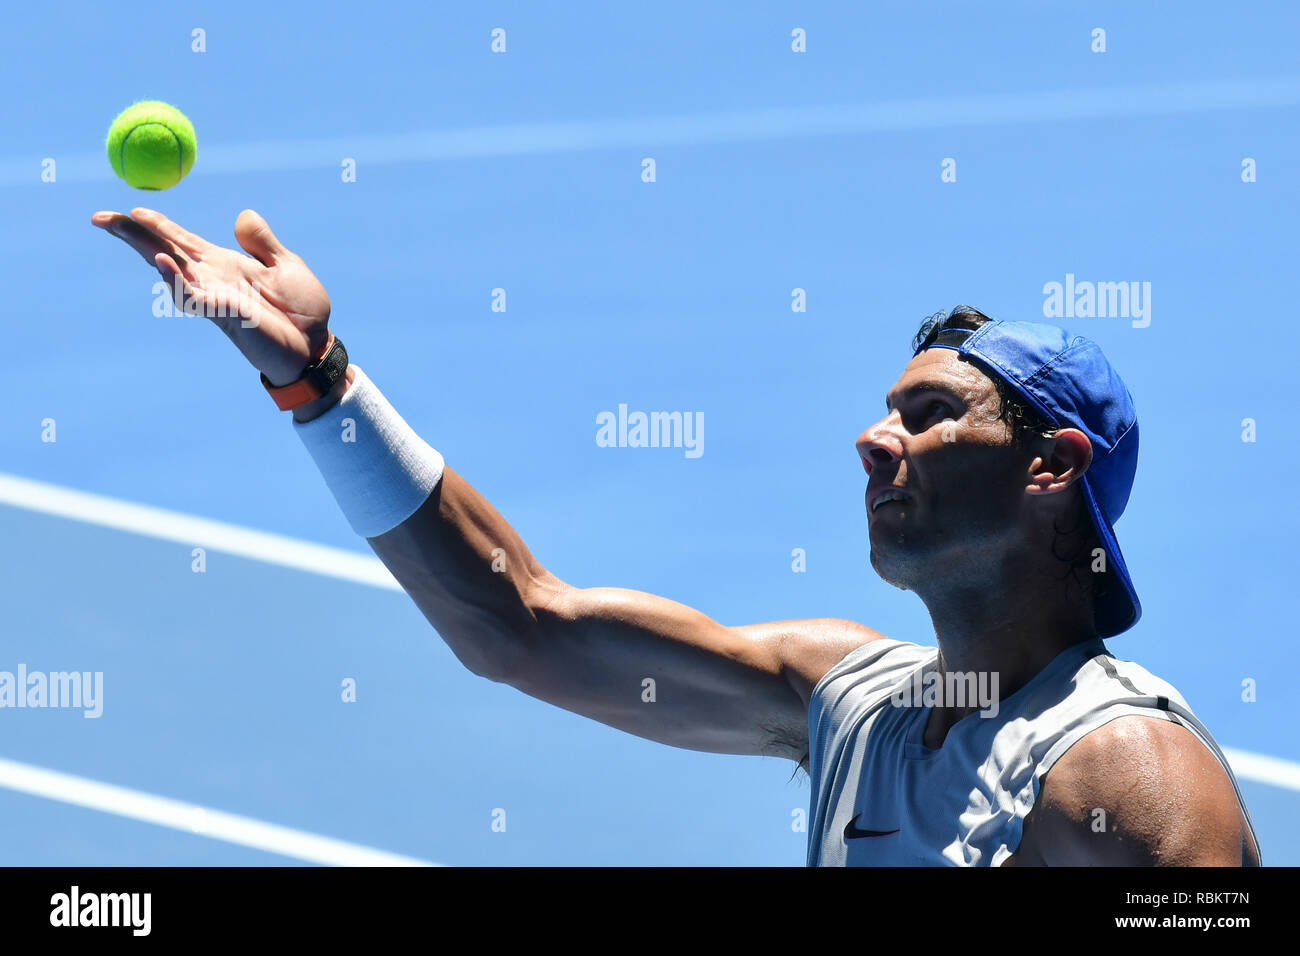 January 11, 2019: 2nd seed Rafael Nadal practises on Rod Laver Arena ahead  of the 2019 Australian Open Grand Slam tennis tournament in Melbourne,  Australia. Sydney Low/Cal Sport Media/Sipa USA(Credit Image: &copy;